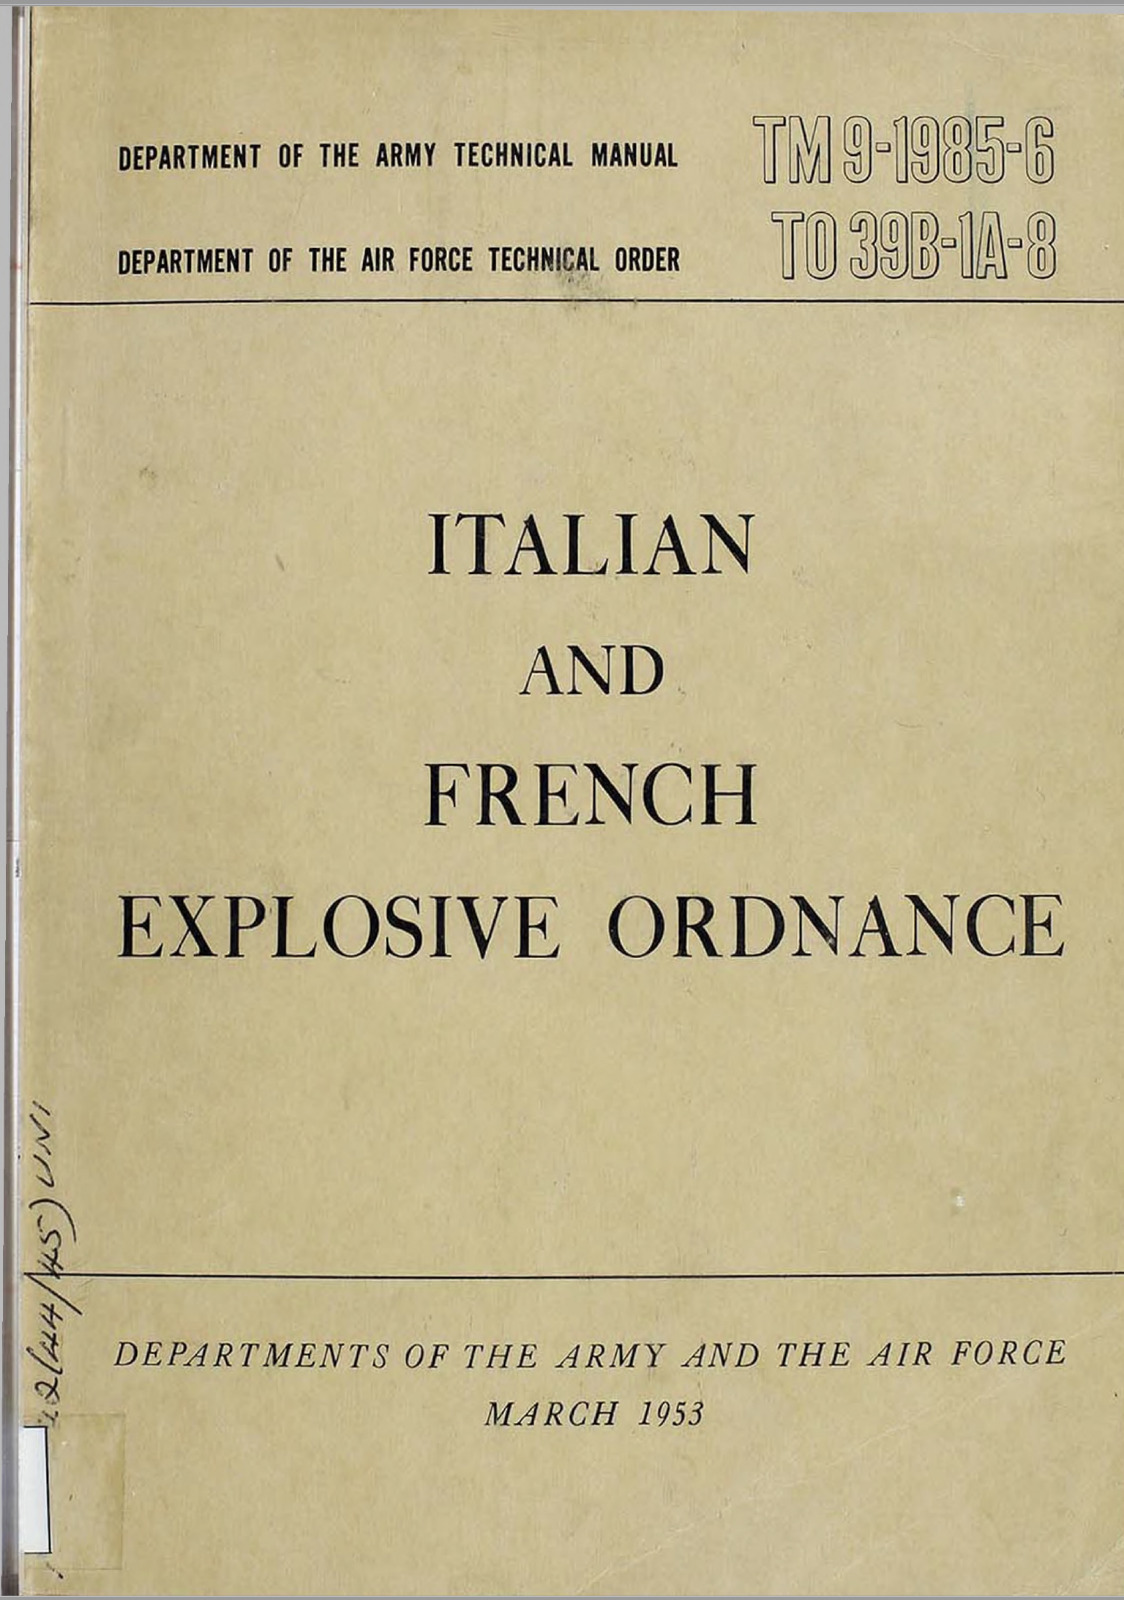 219 Page 1953 TM 9-1985-6 Italian French Explosive Ordnance Technical Manual CD